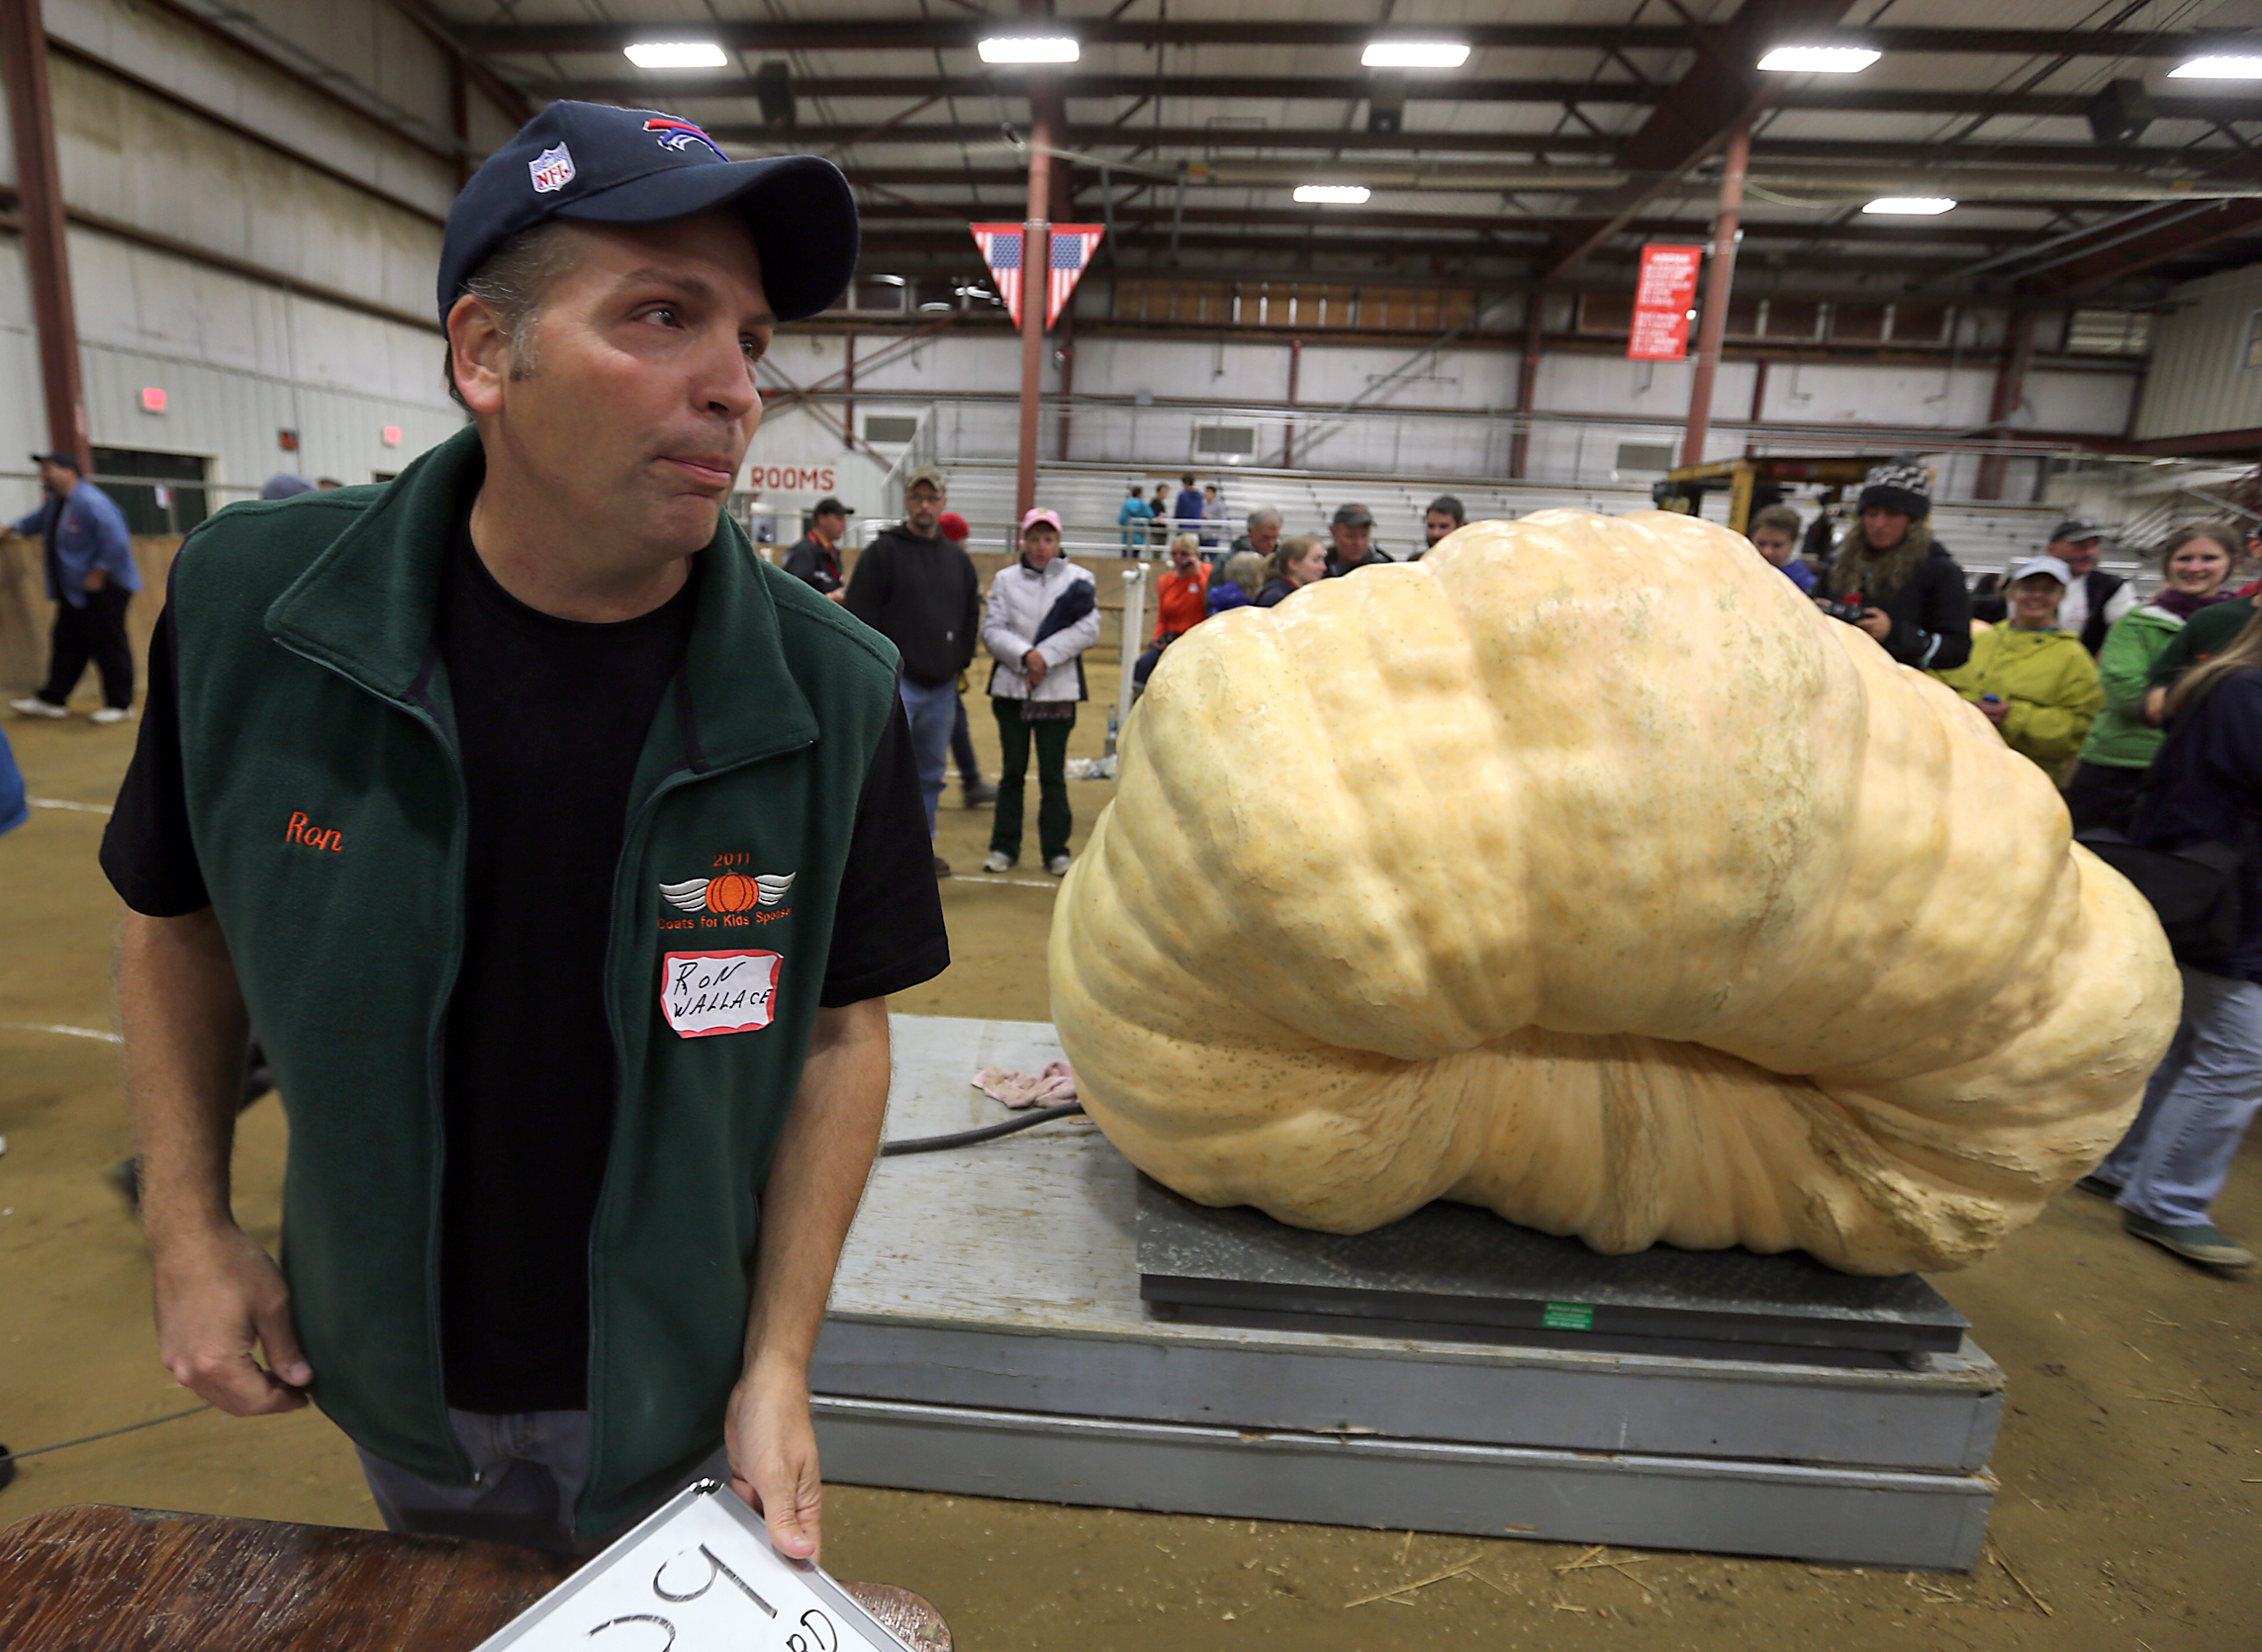 2,009lb Pumpkin Sets Record For The Largest In The World